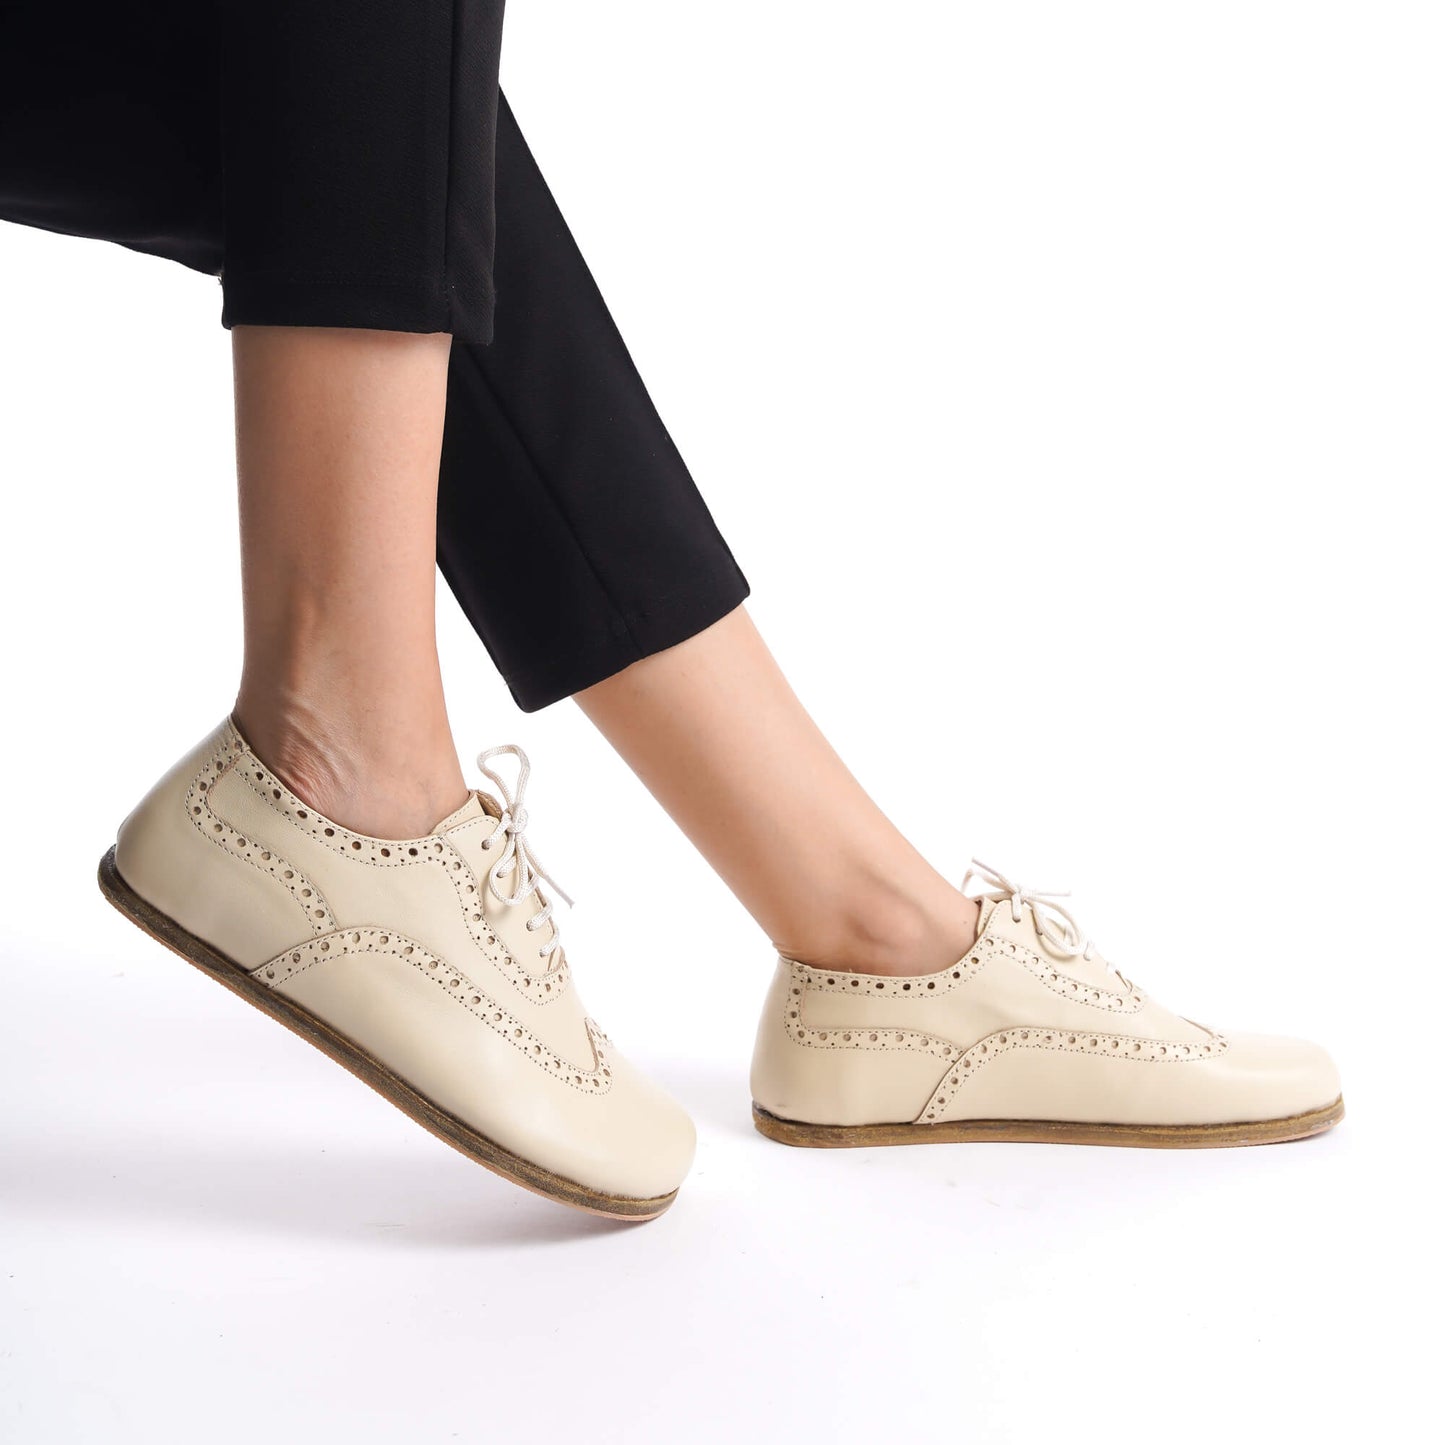 Side view of Doris Leather Barefoot Women's Oxfords in beige, worn by a model in black pants, highlighting the zero-drop design and flexibility.